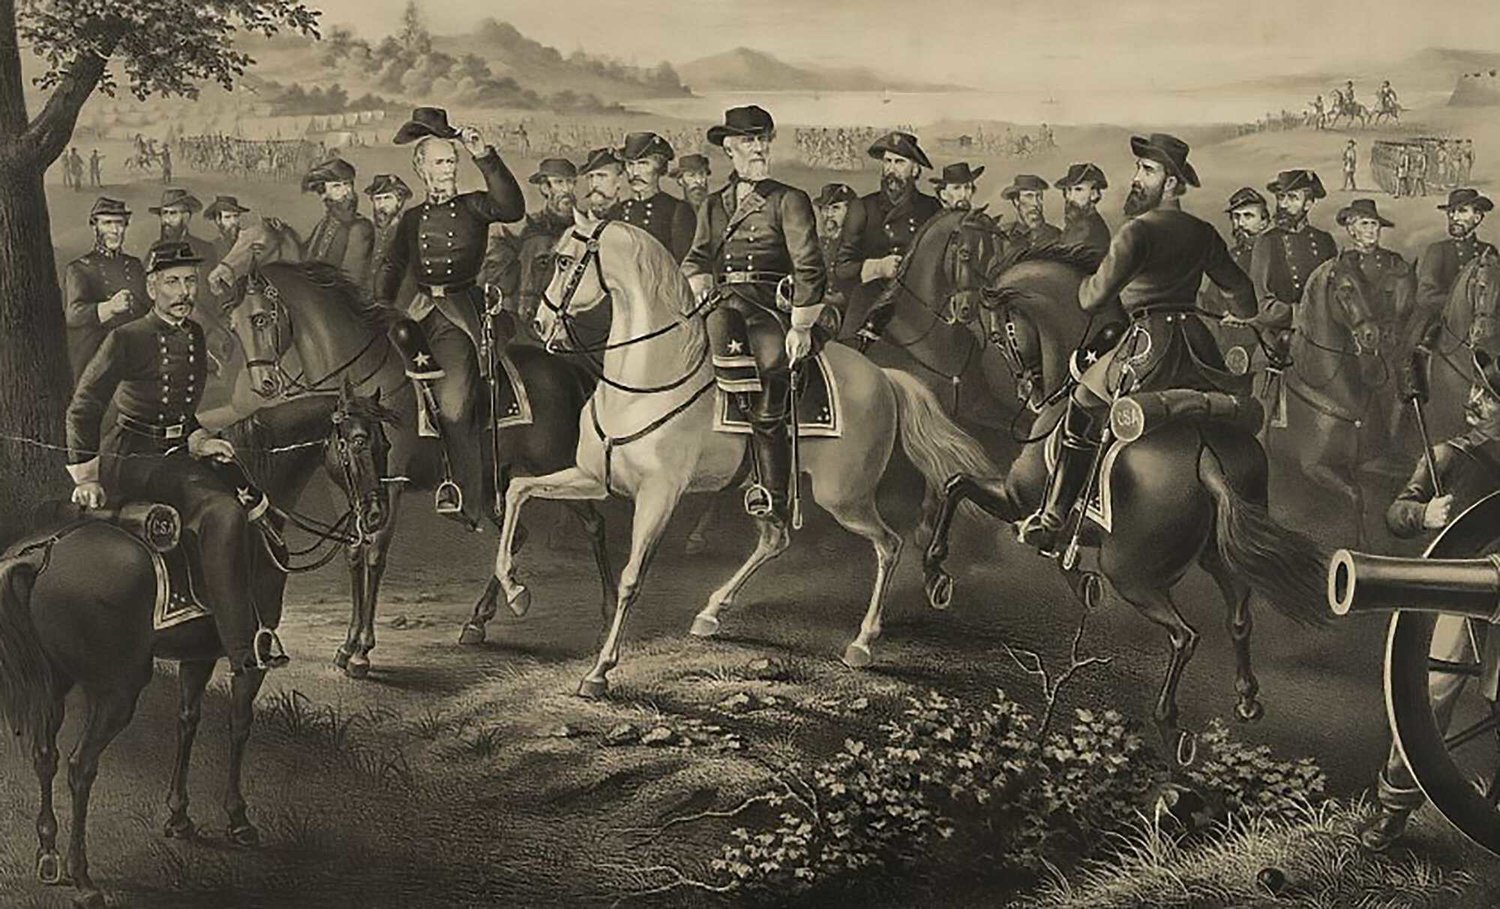 General Lee and 21 confederate generals on horseback. 1867. Courtesy: Library of Congress.